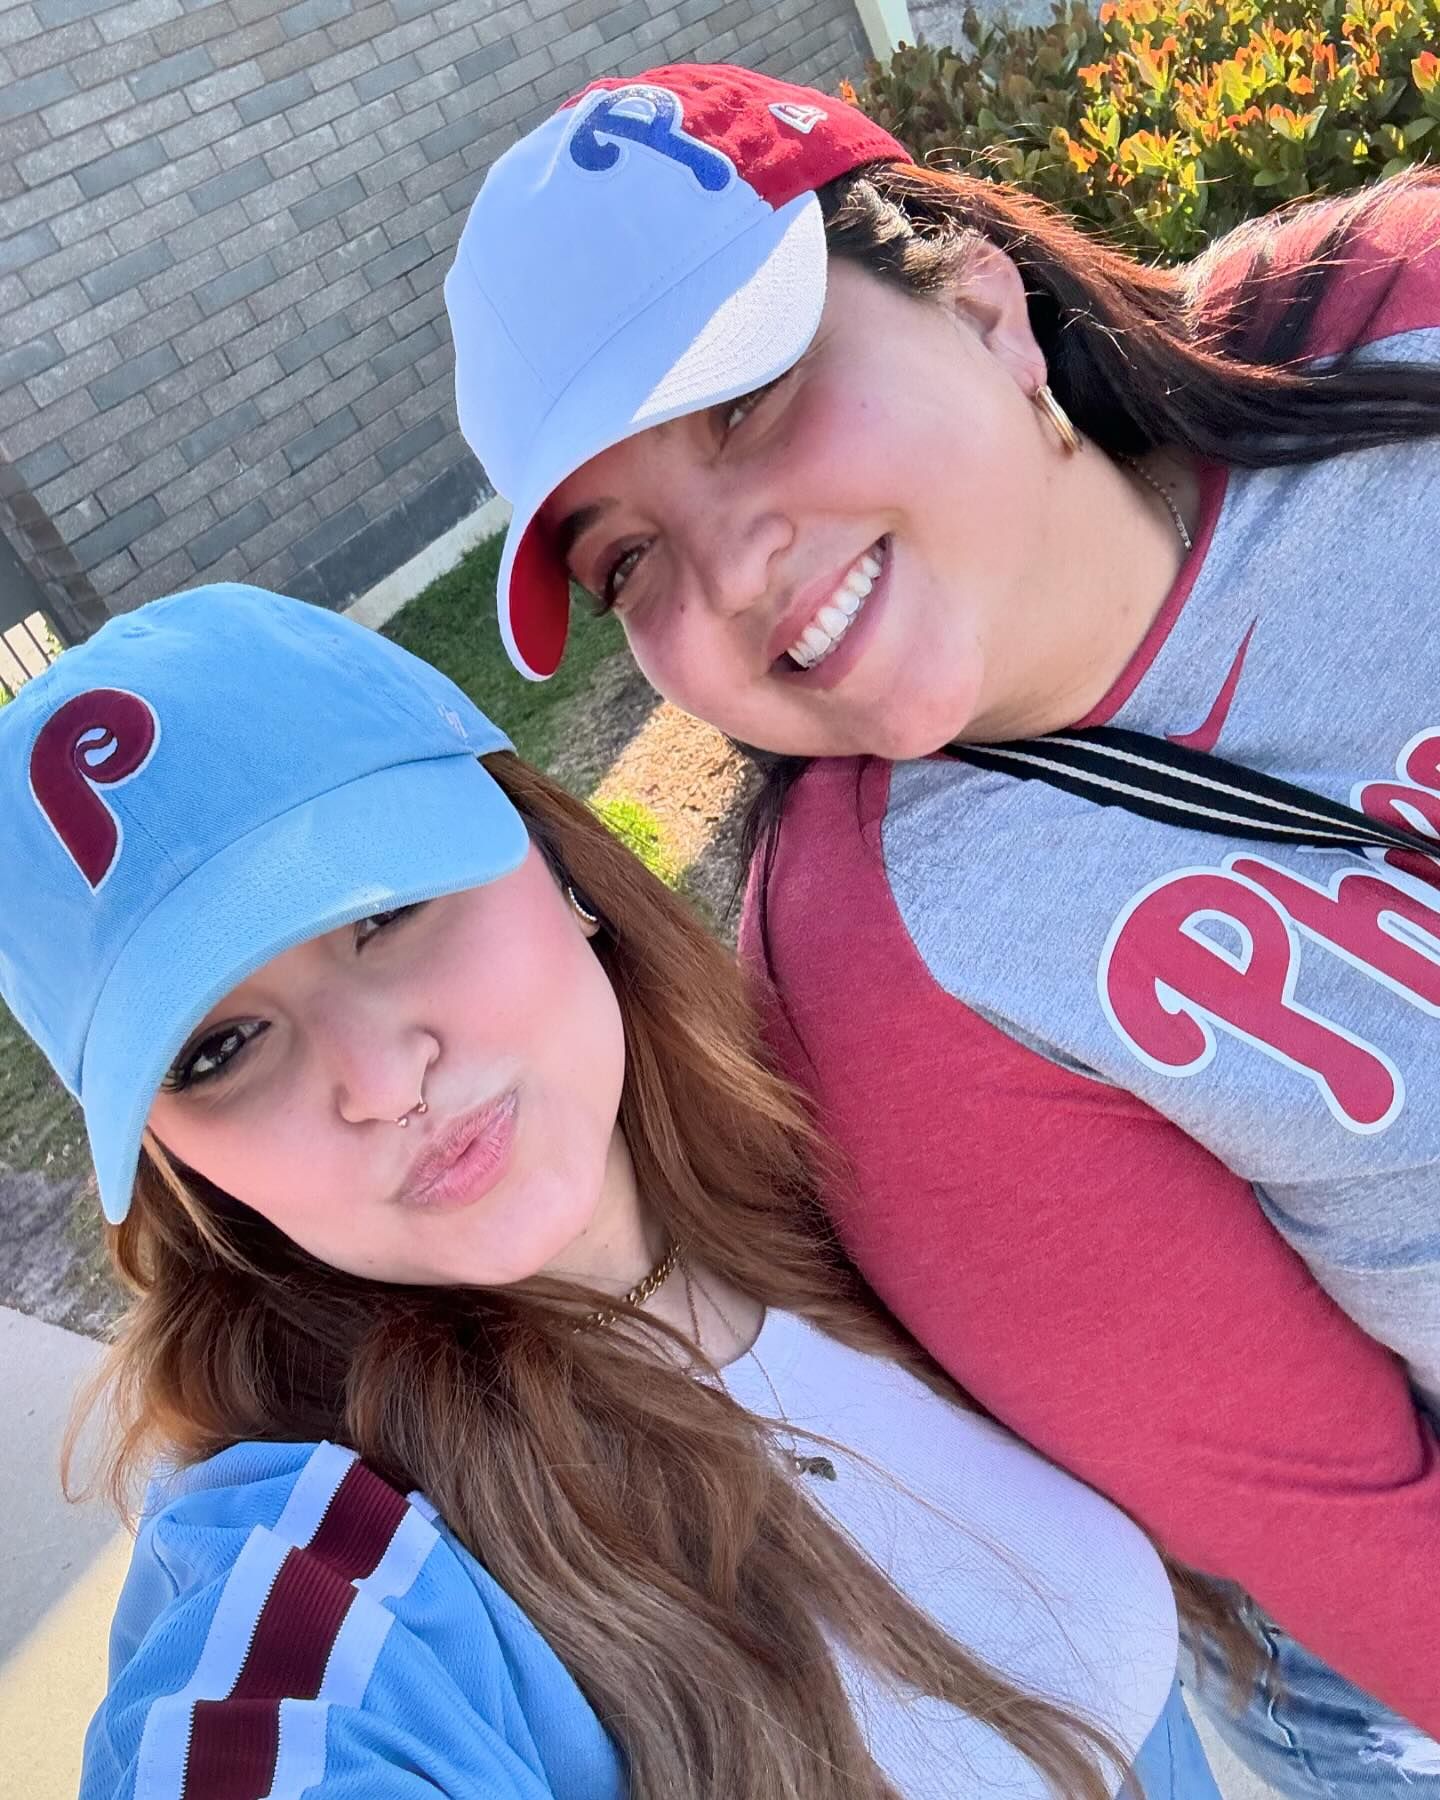 Finally made it to Spring Training!
Go @phillies!!